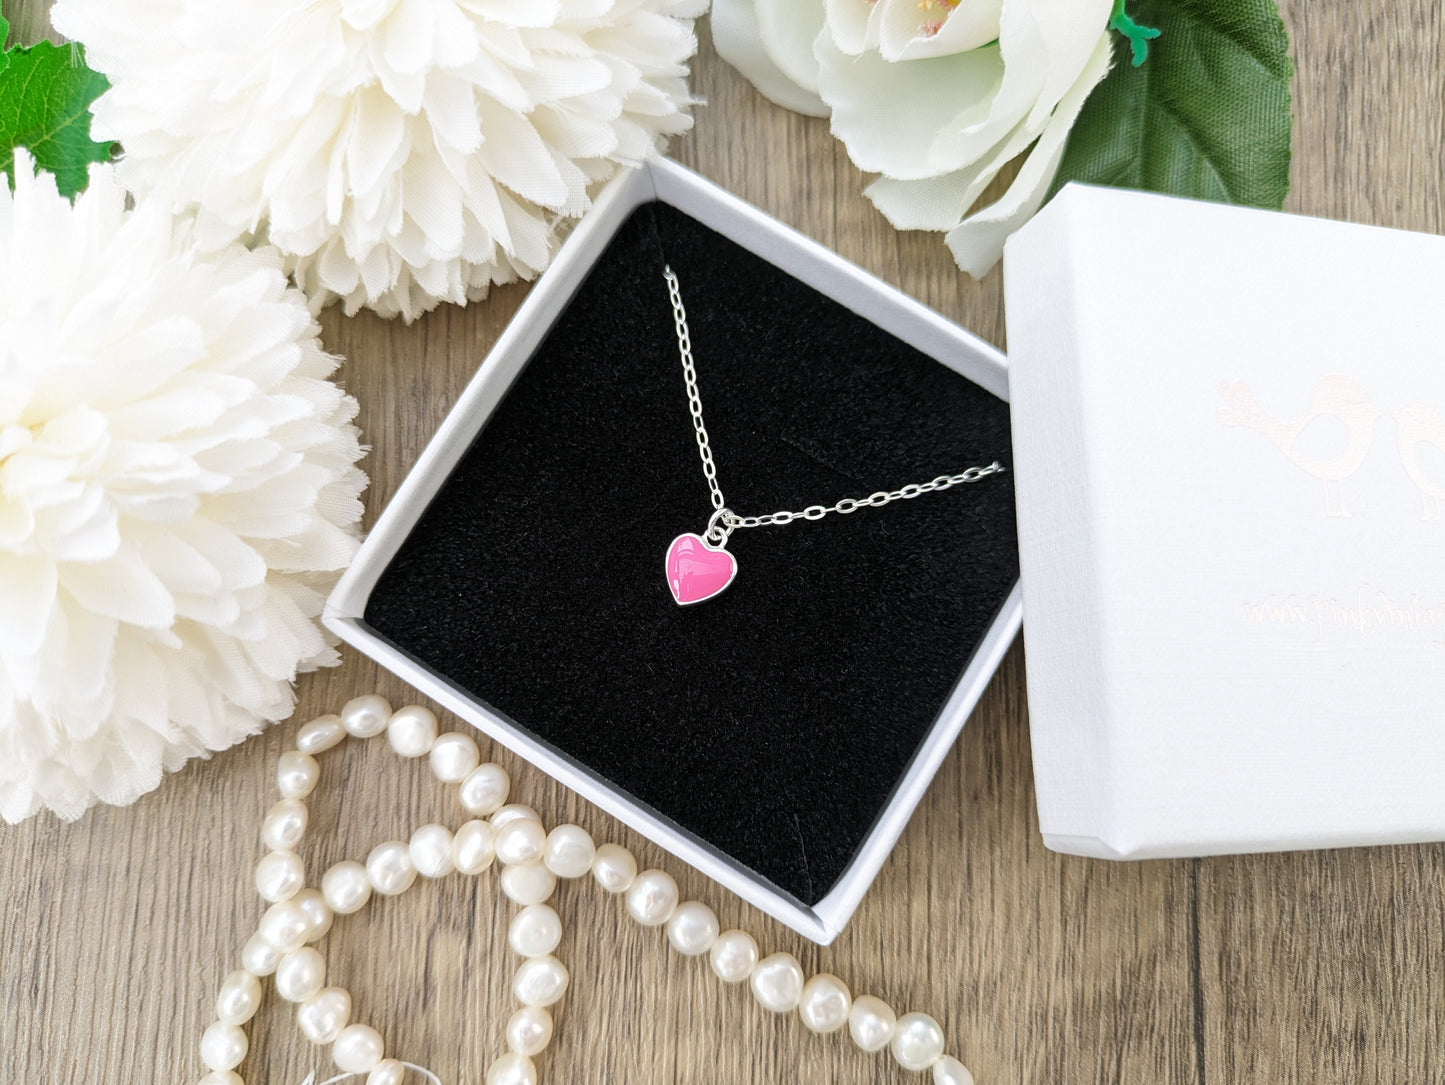 Mothers day necklace. Pink heart necklace.